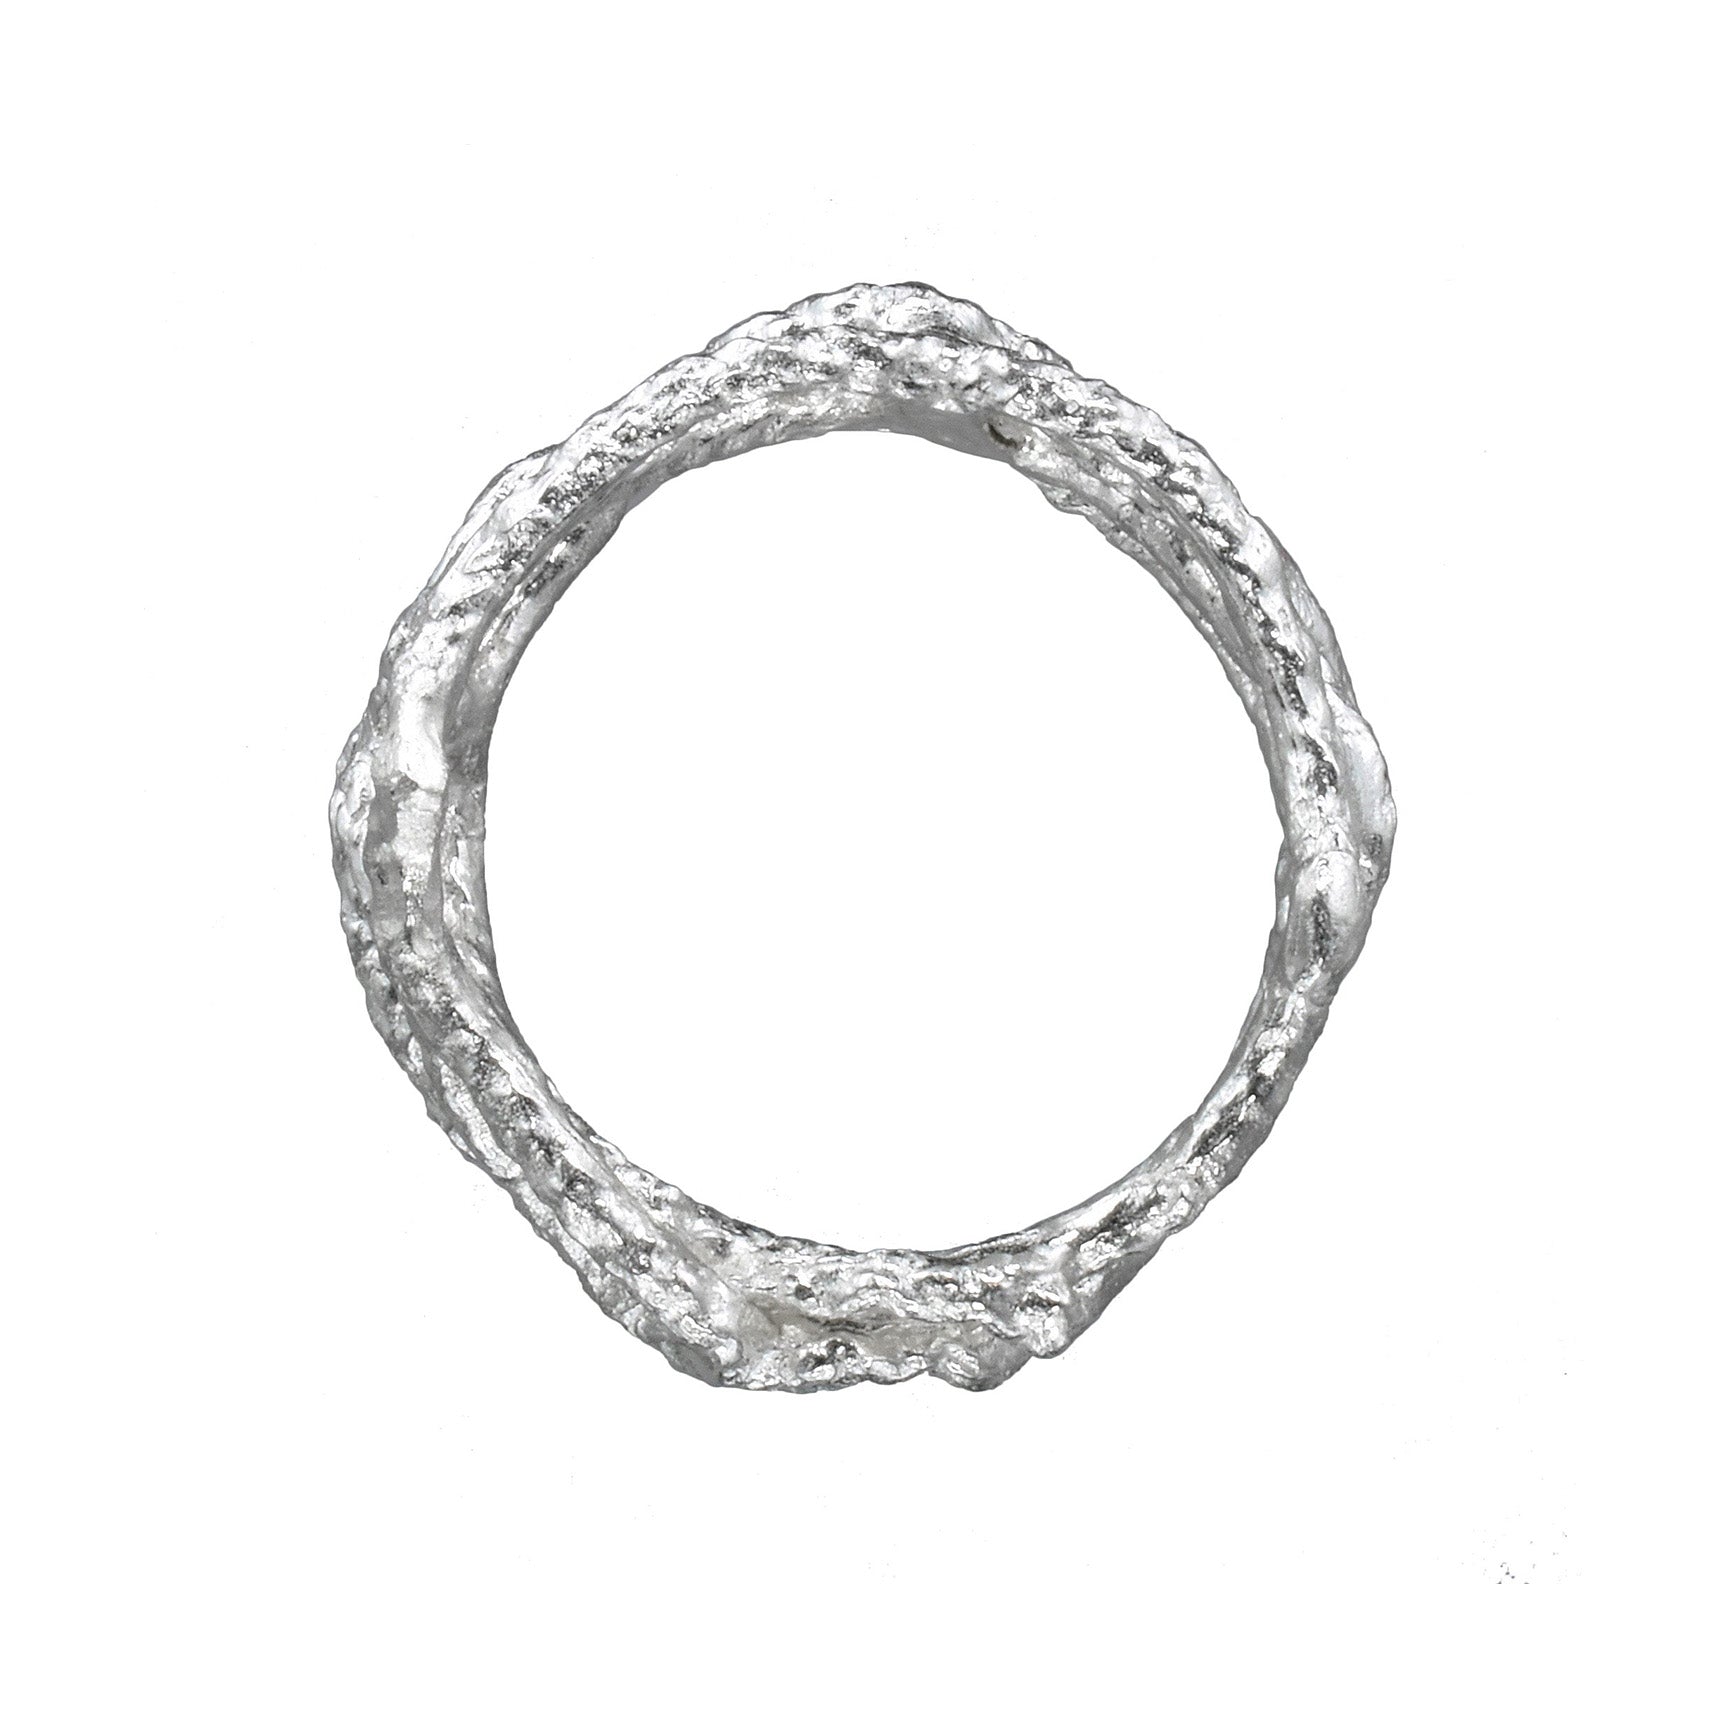 Fishing Net Ring - Sterling Silver - US Size 7